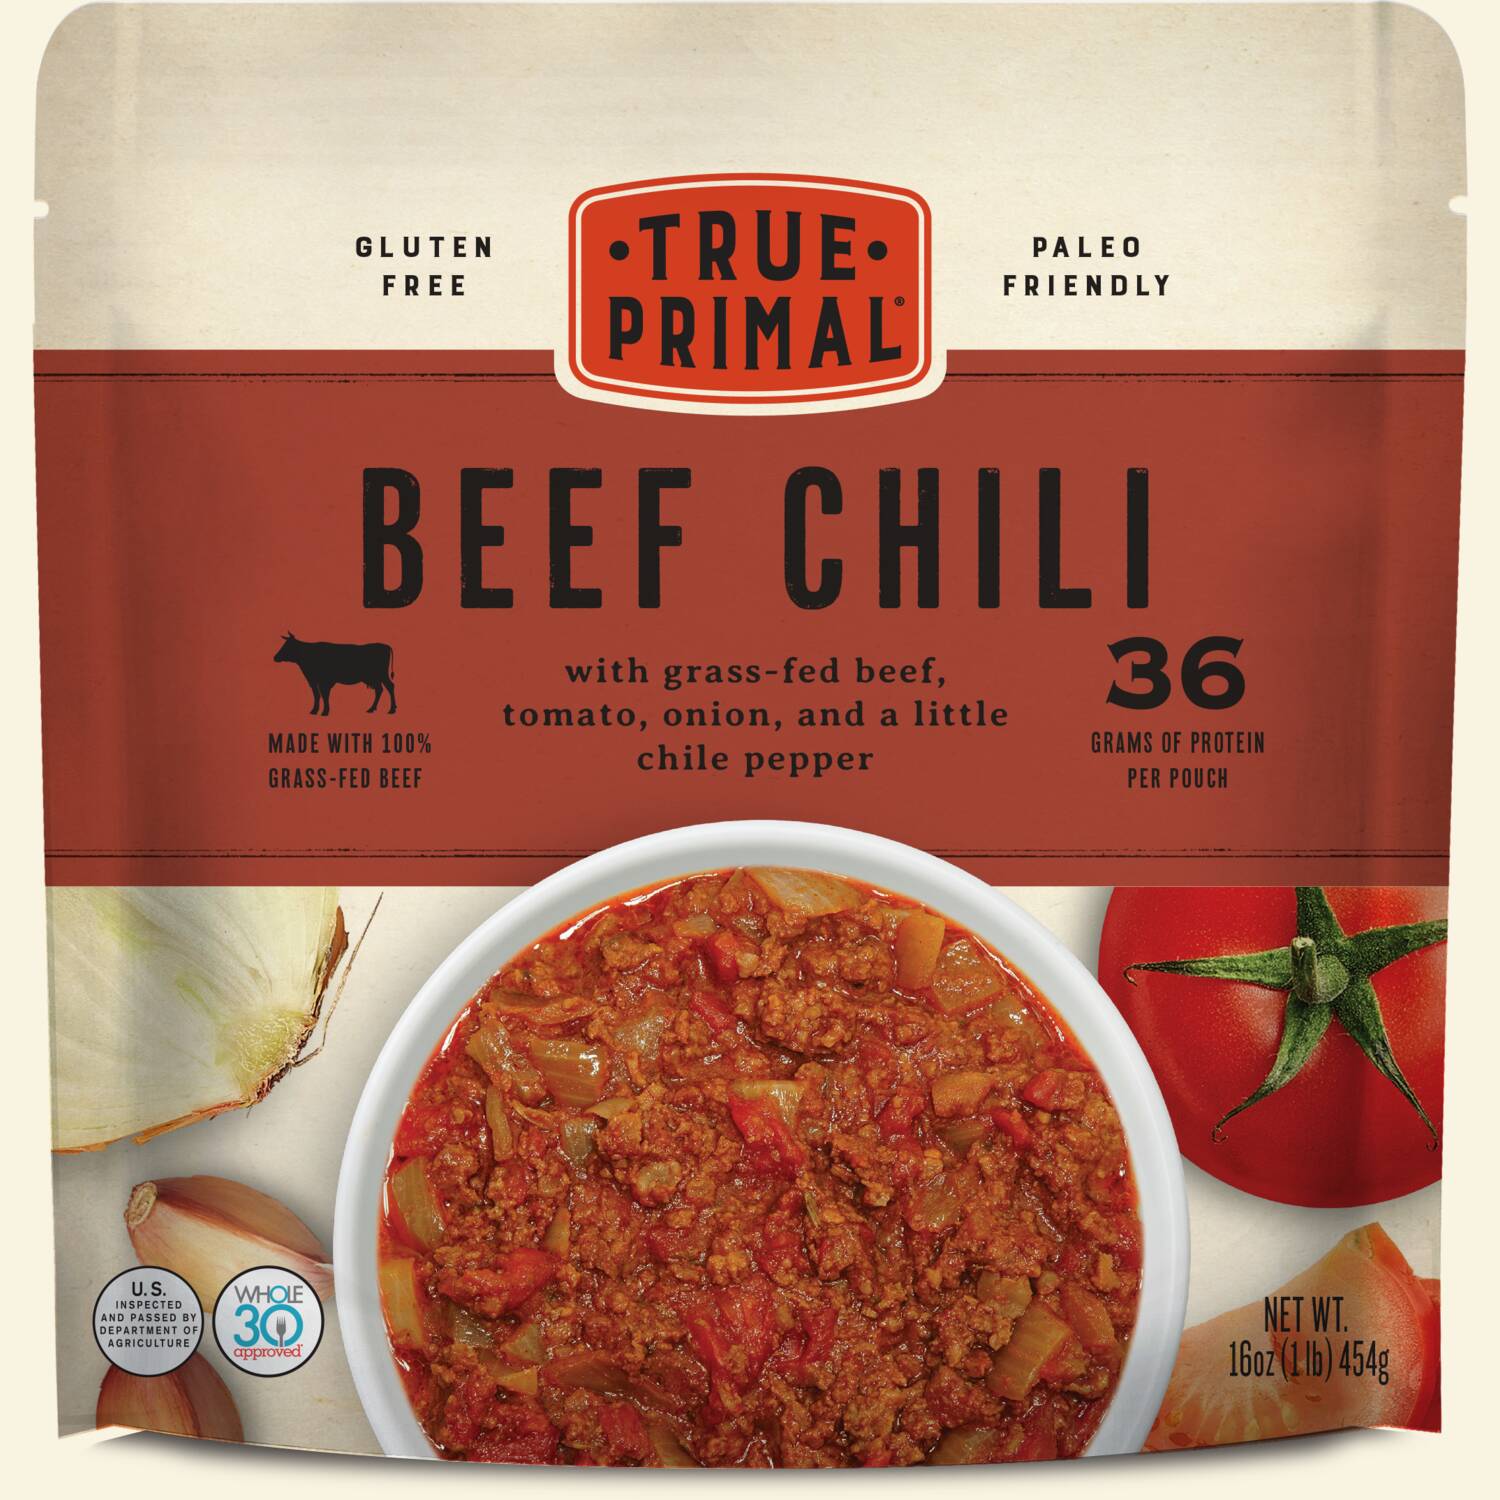 True Primal Beef Chili in pouch, front